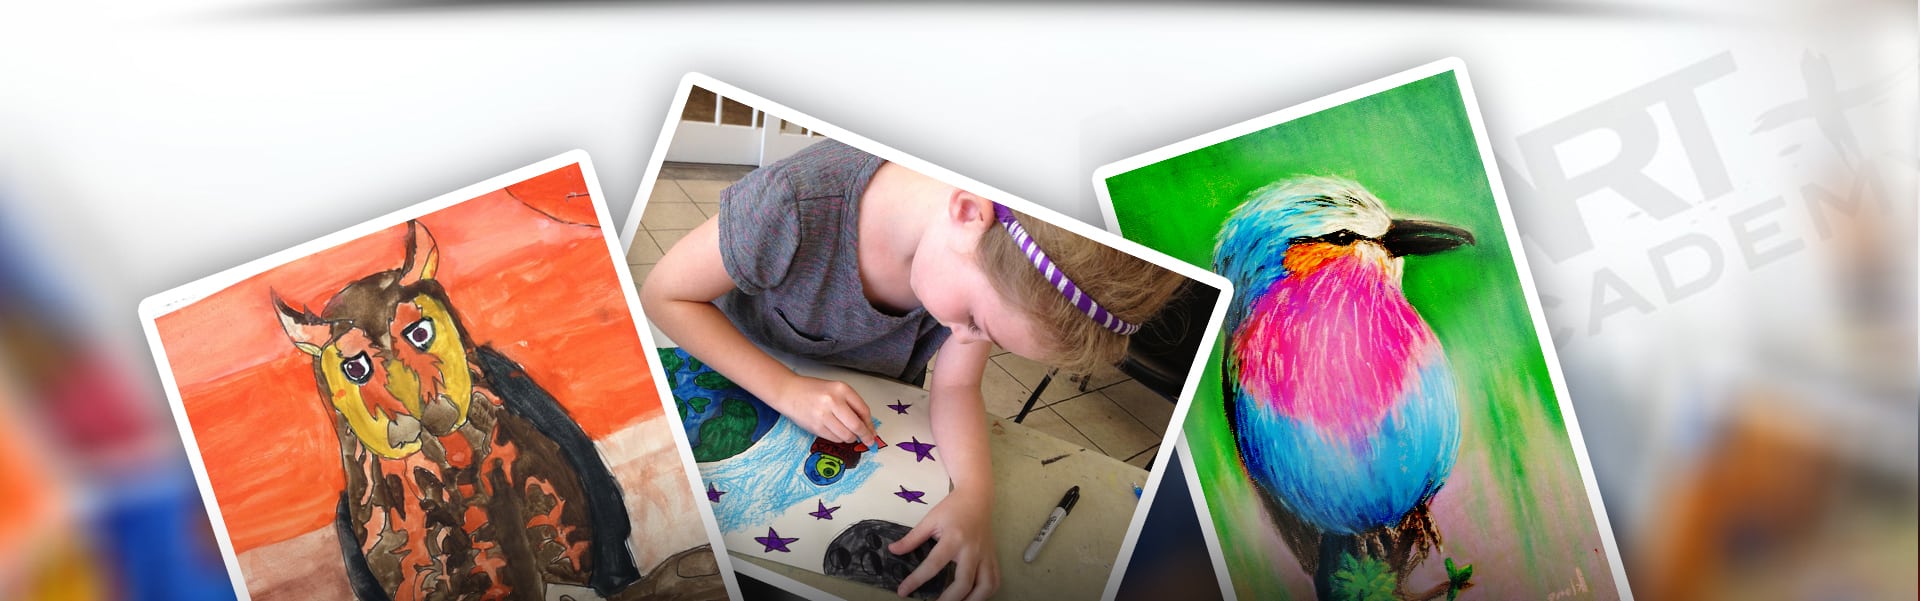 Painting and Drawing classes for kids ages 7-9 ... - ART + Academy